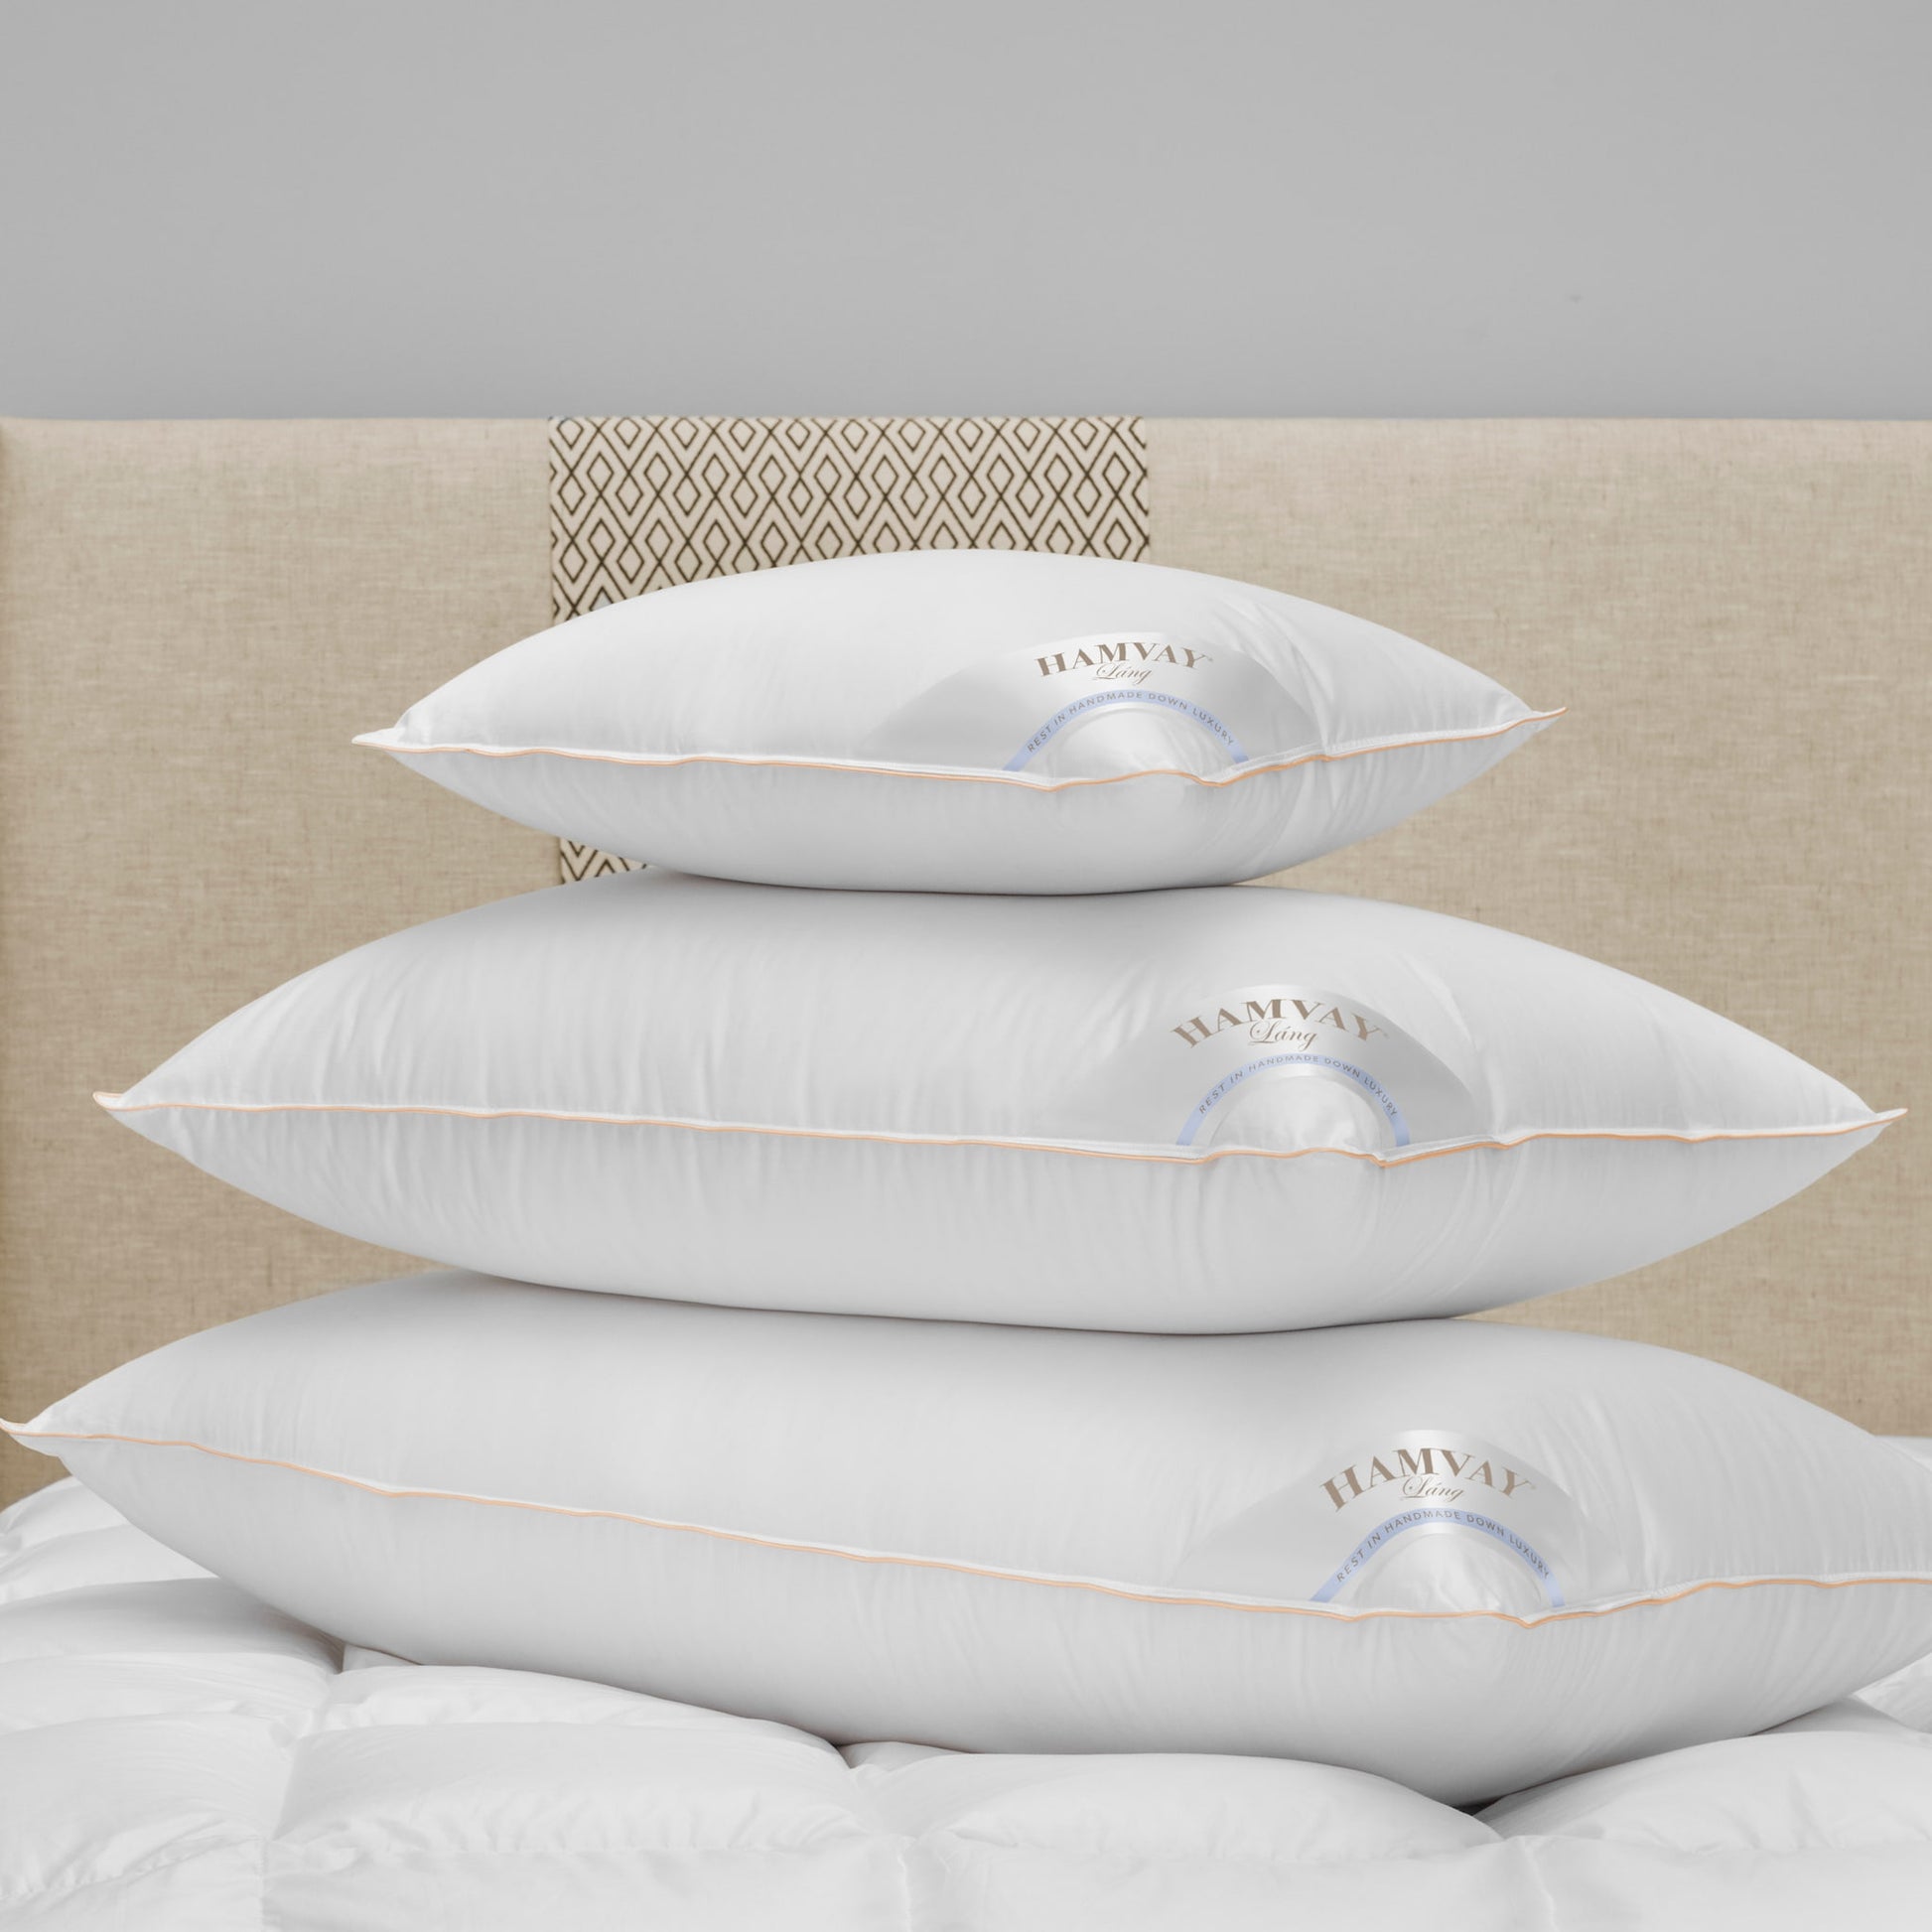 FIRM PILLOWS, SUPER ASSISTANCE WHITE PILLOWS 4 PACK COMPANY SUPPORT BED  PILLOWS (1 PILLOW), 28 X 28 INCHES DESIGNED FOR BACK AND SIDE SLEEPER PILLOW,  BEST PILLOW FOR SIDE SLEEPERS.